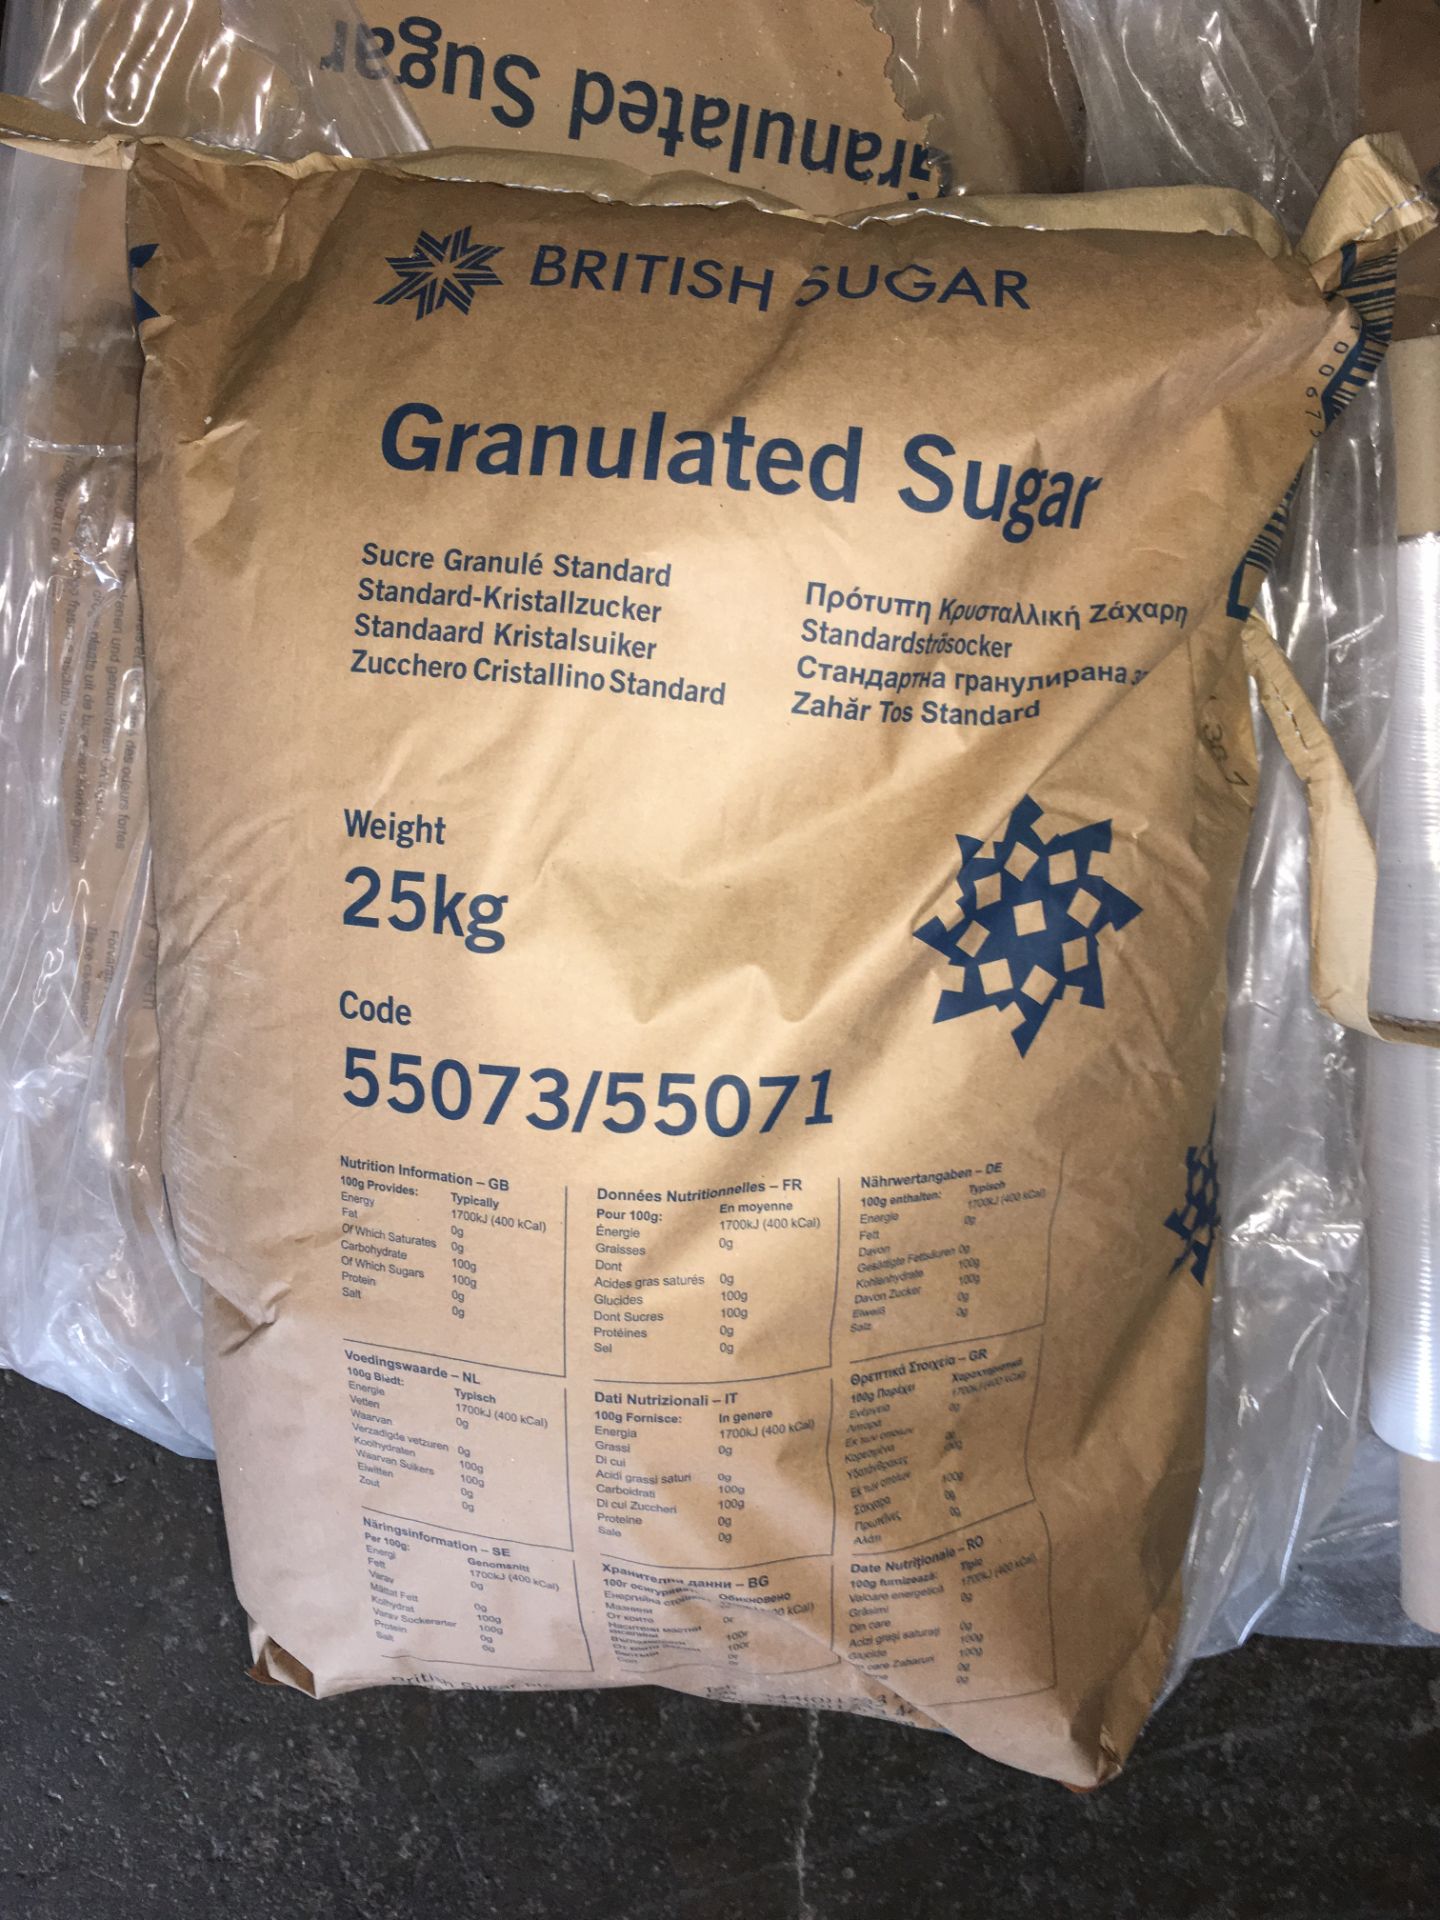 13 x 25kg Bags of Granulated Sugar - NO EXPIRATION DATE - Image 2 of 2